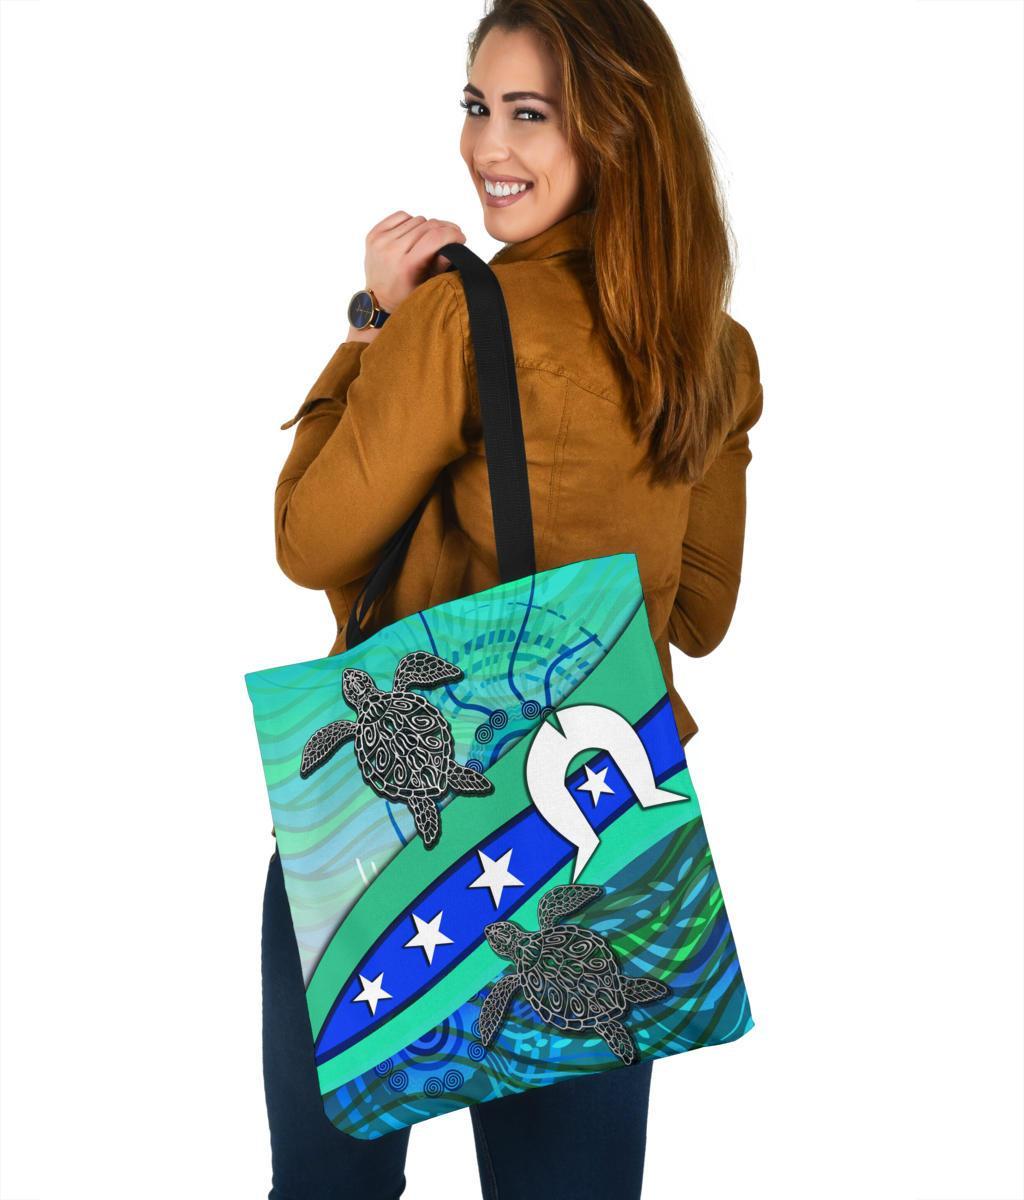 tote-bag-torres-strait-flag-and-turtle